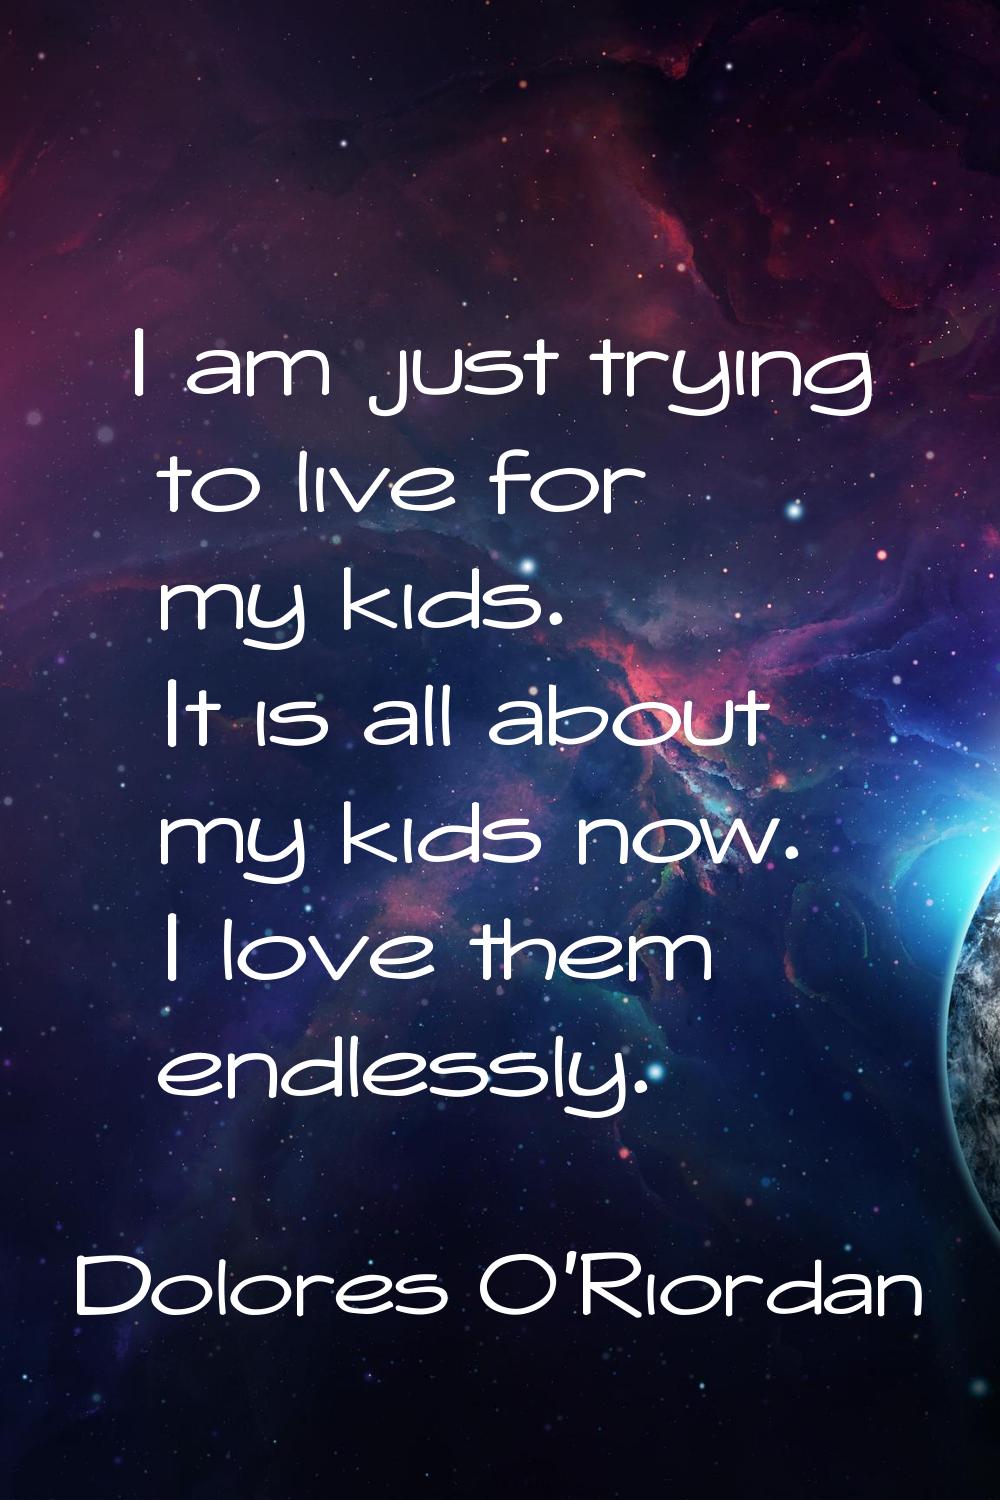 I am just trying to live for my kids. It is all about my kids now. I love them endlessly.